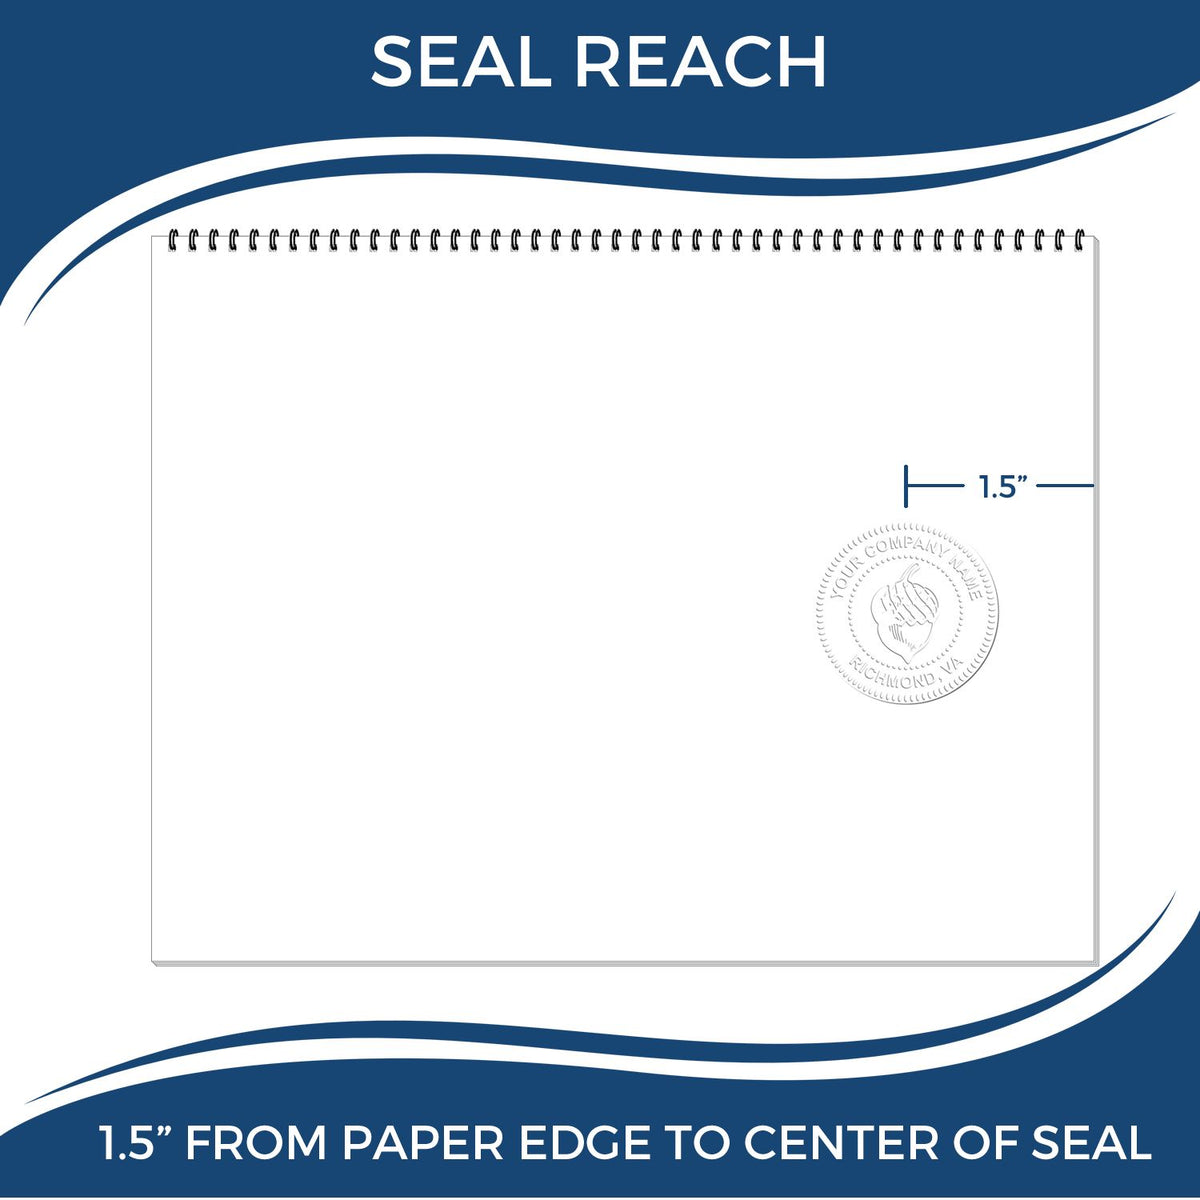 An infographic showing the seal reach which is represented by a ruler and a miniature seal image of the Gift Vermont Architect Seal